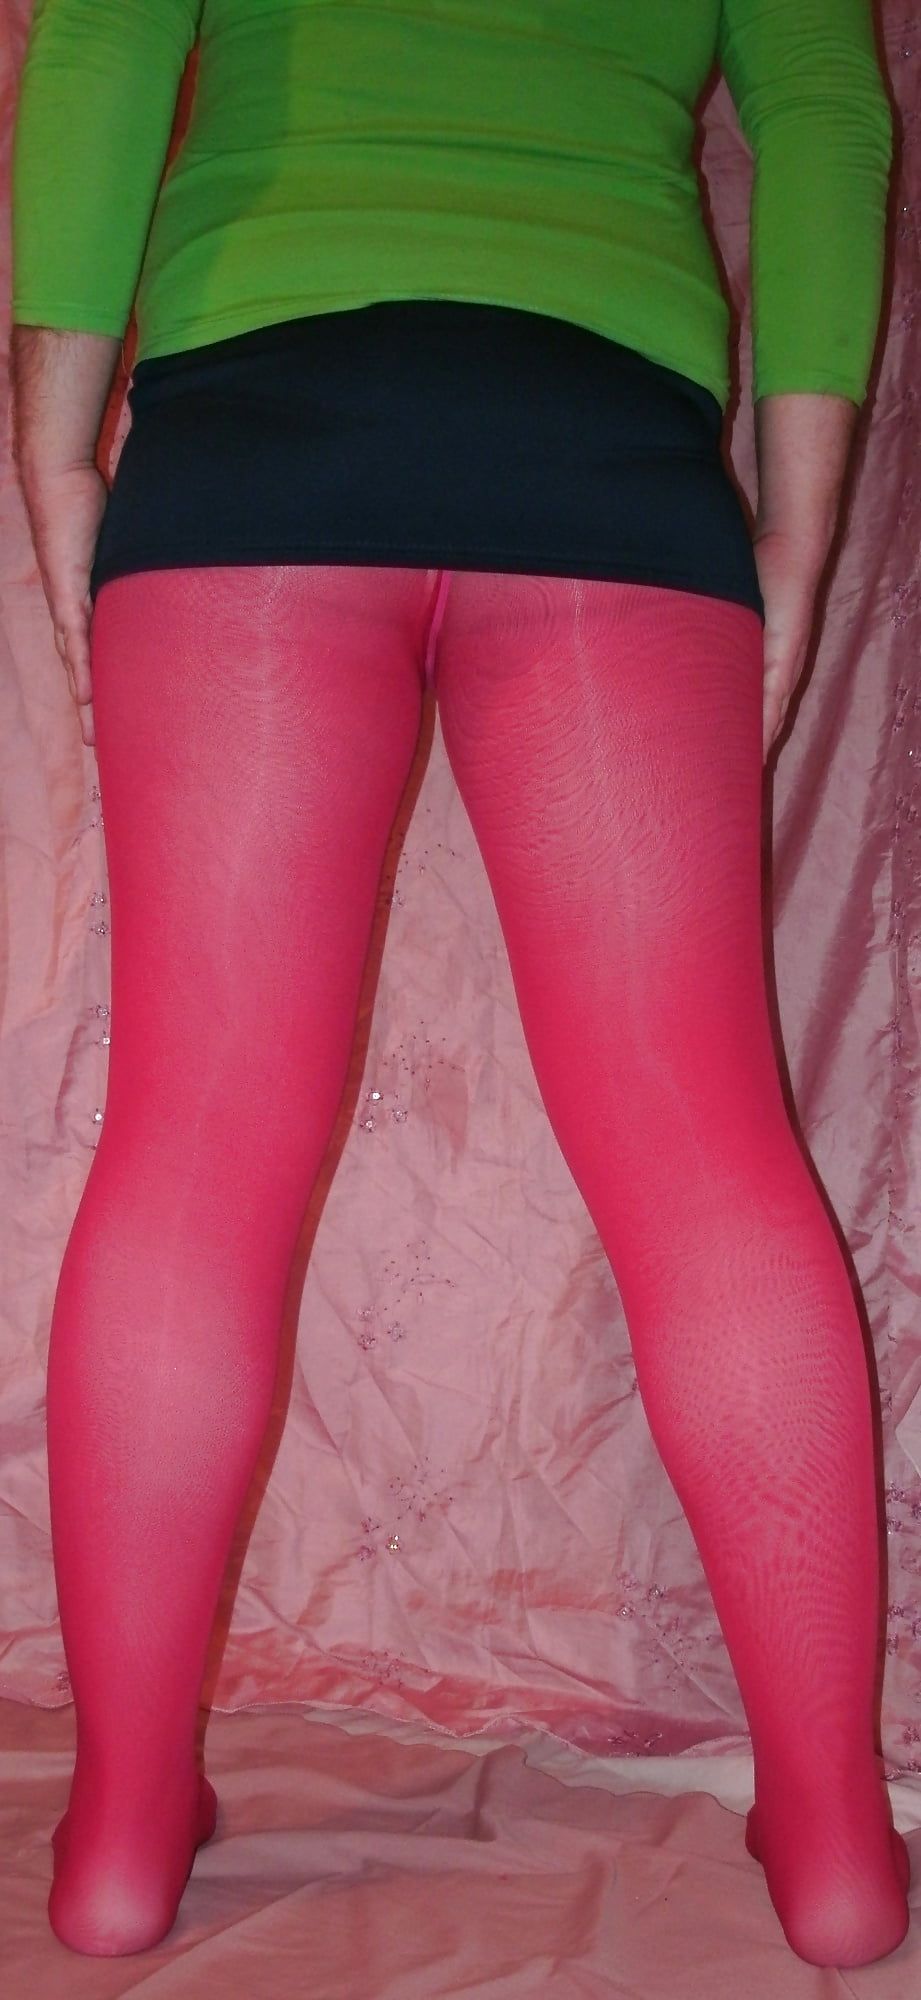 Red stockings 2 #13